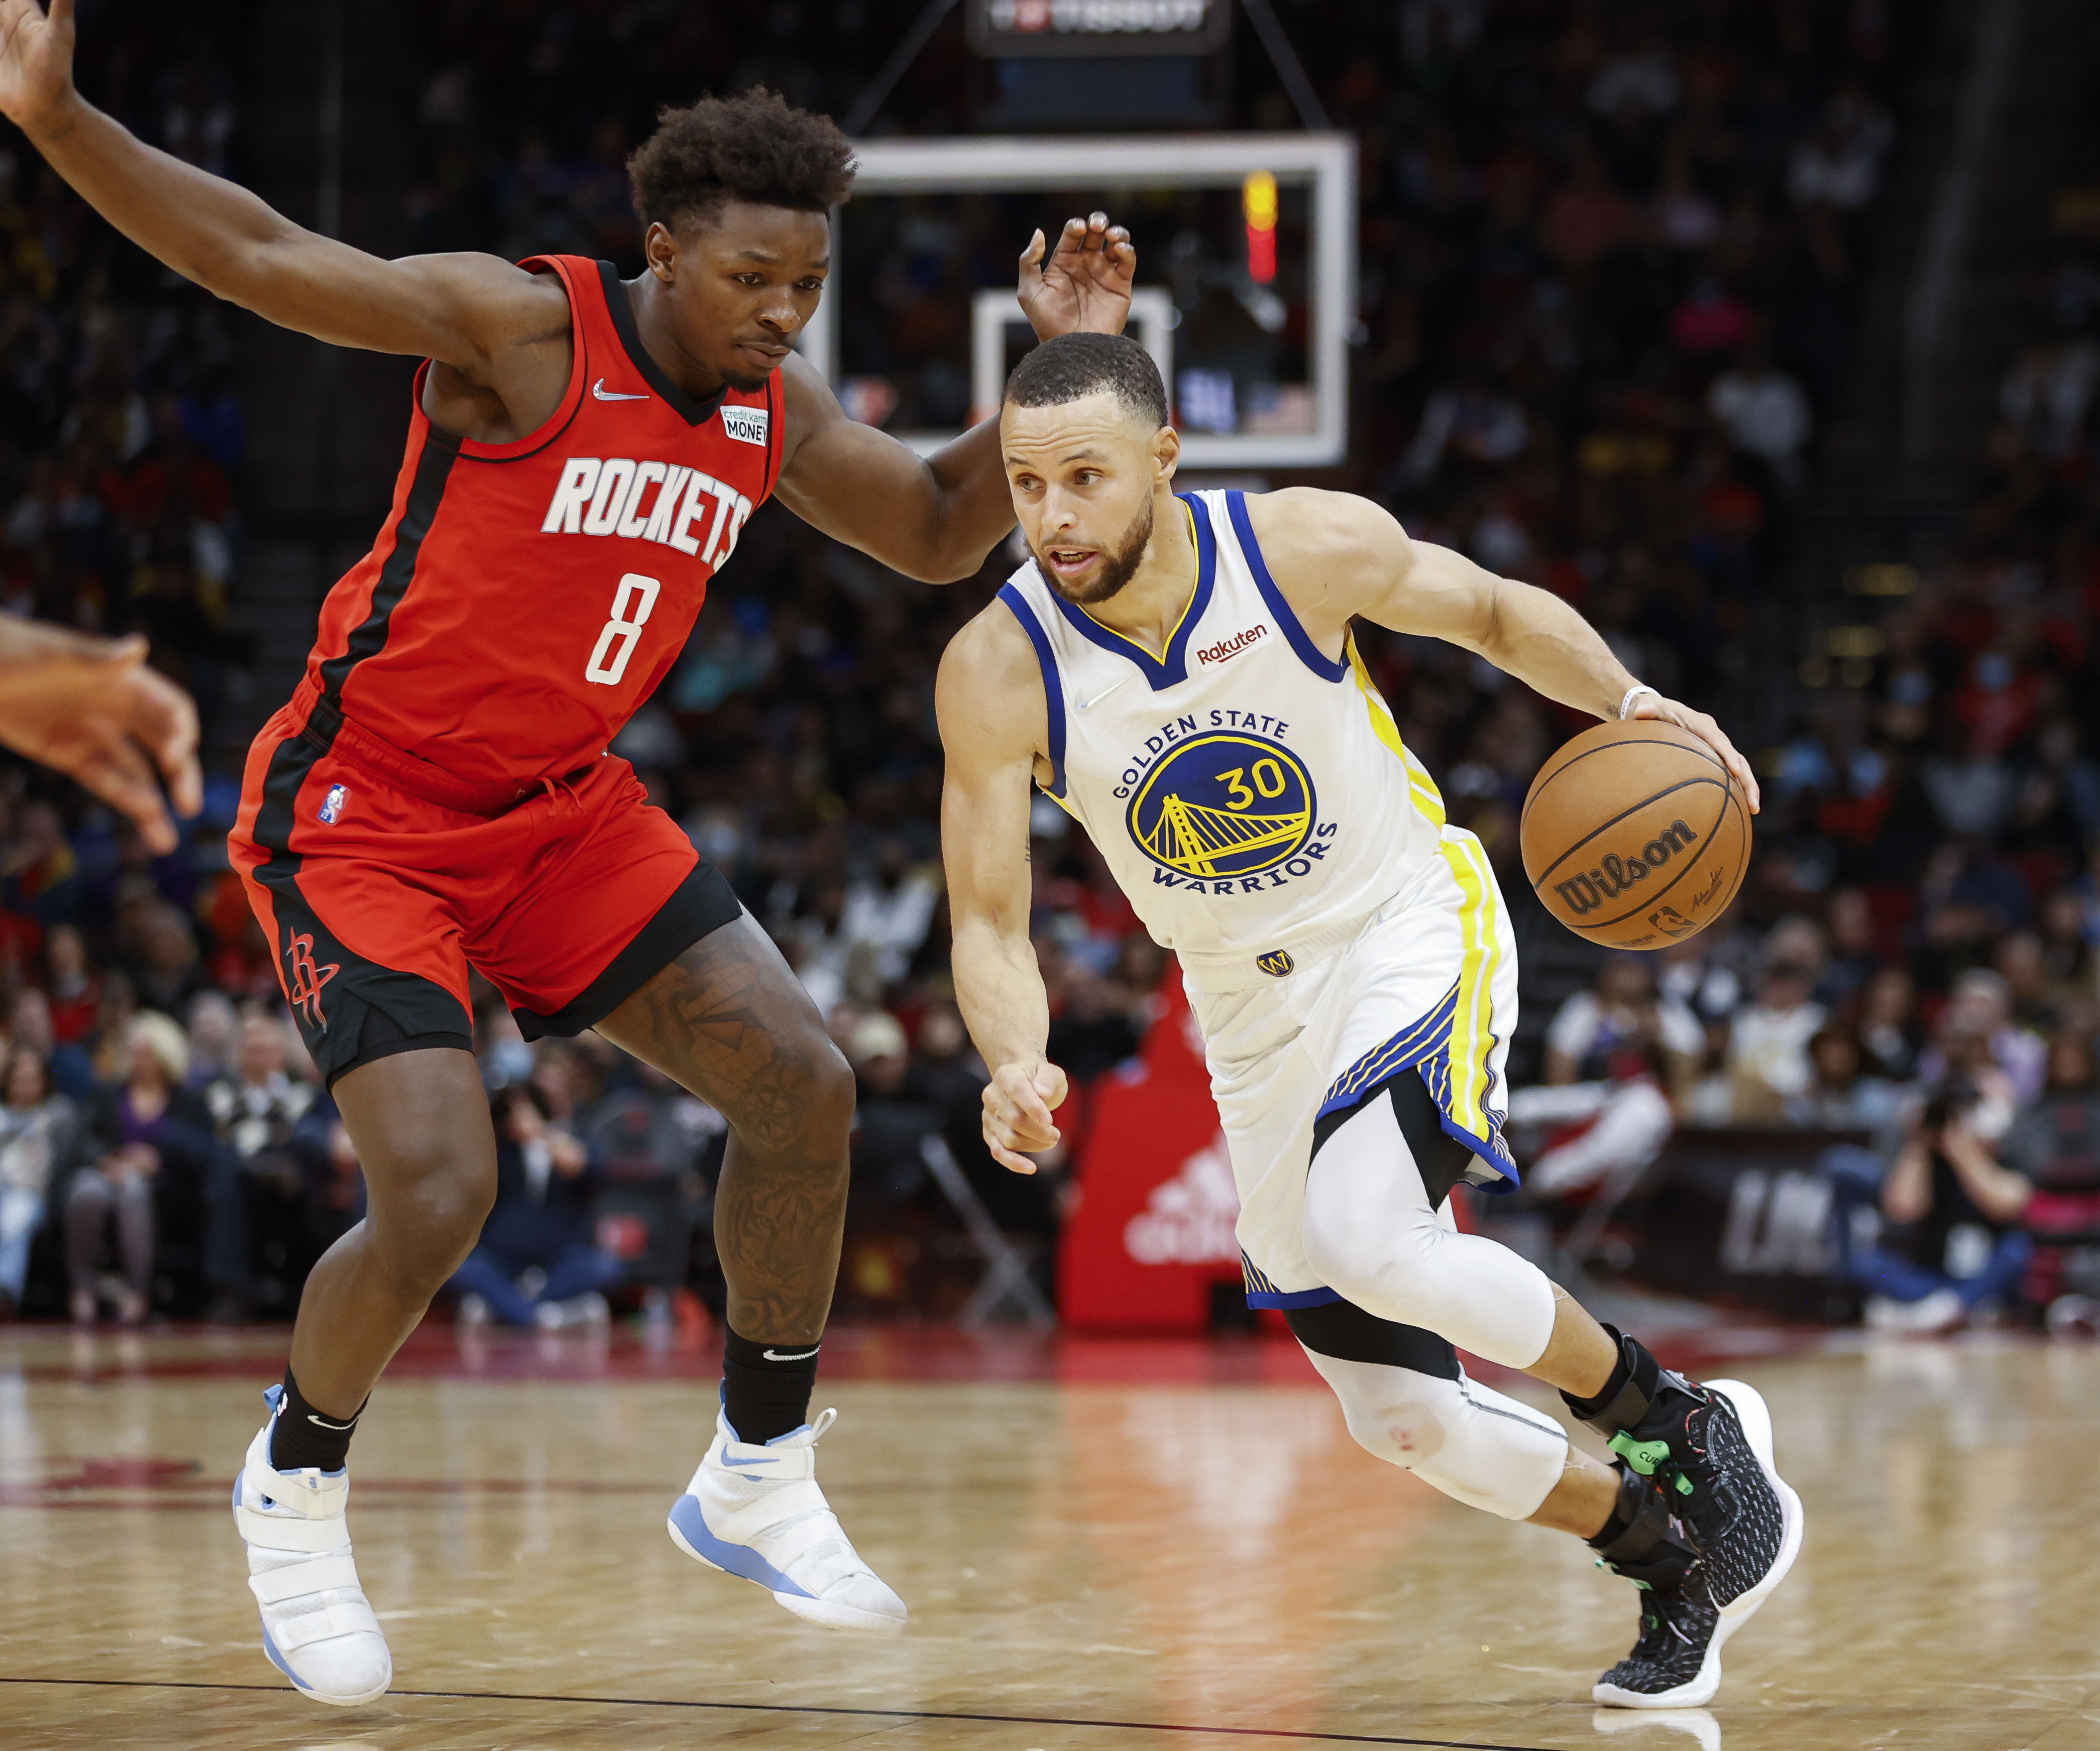 Golden State Warriors guard Stephen Curry (30) drives with the ball as Houston Rockets forward Jae’Sean Tate (8) defends during the fourth quarter at Toyota Center.